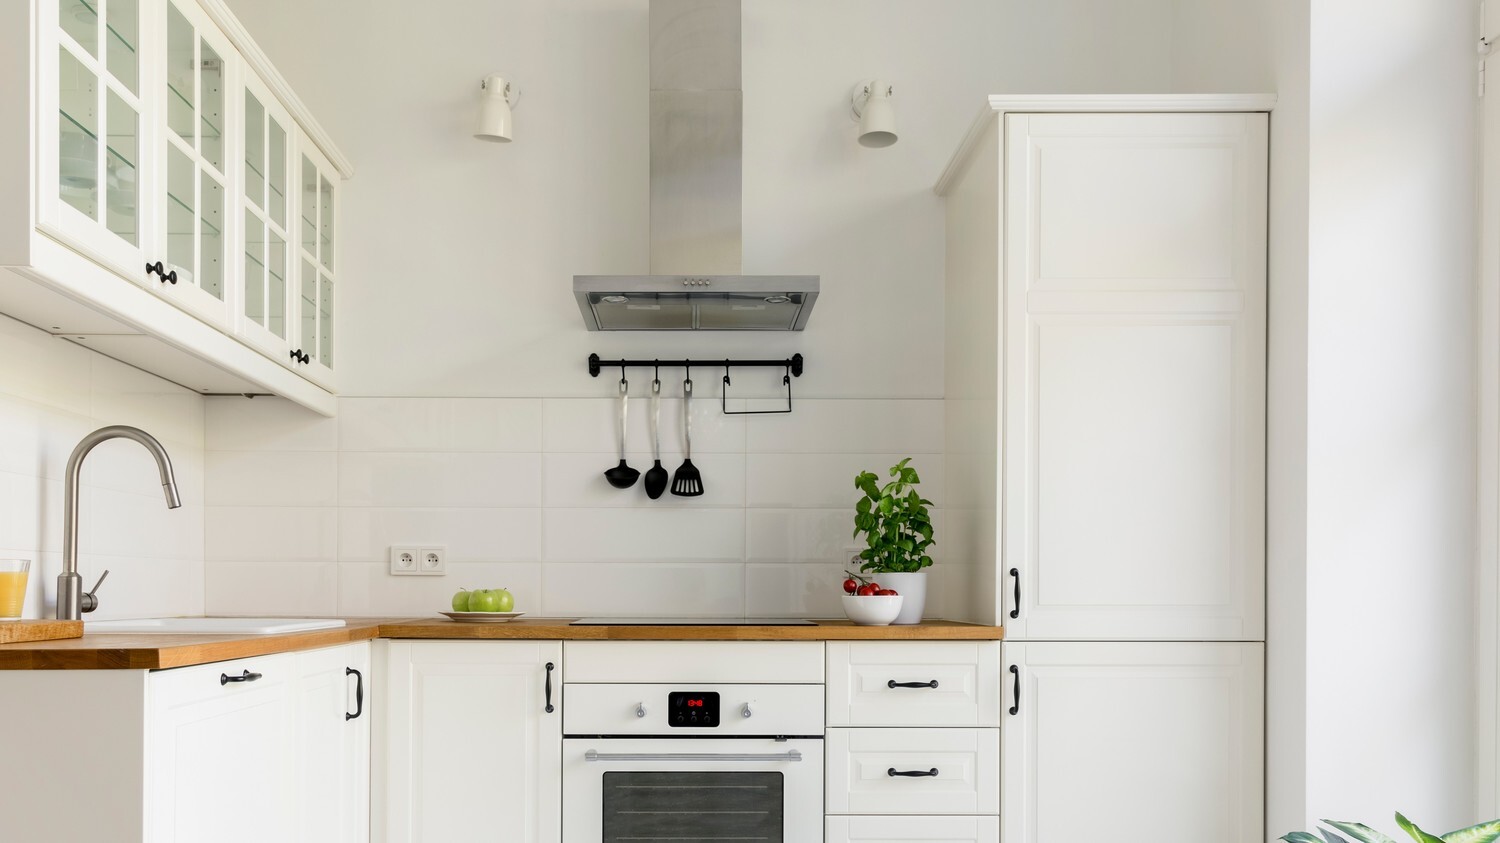 A white, modern kitchen with a rangehood and an oven.